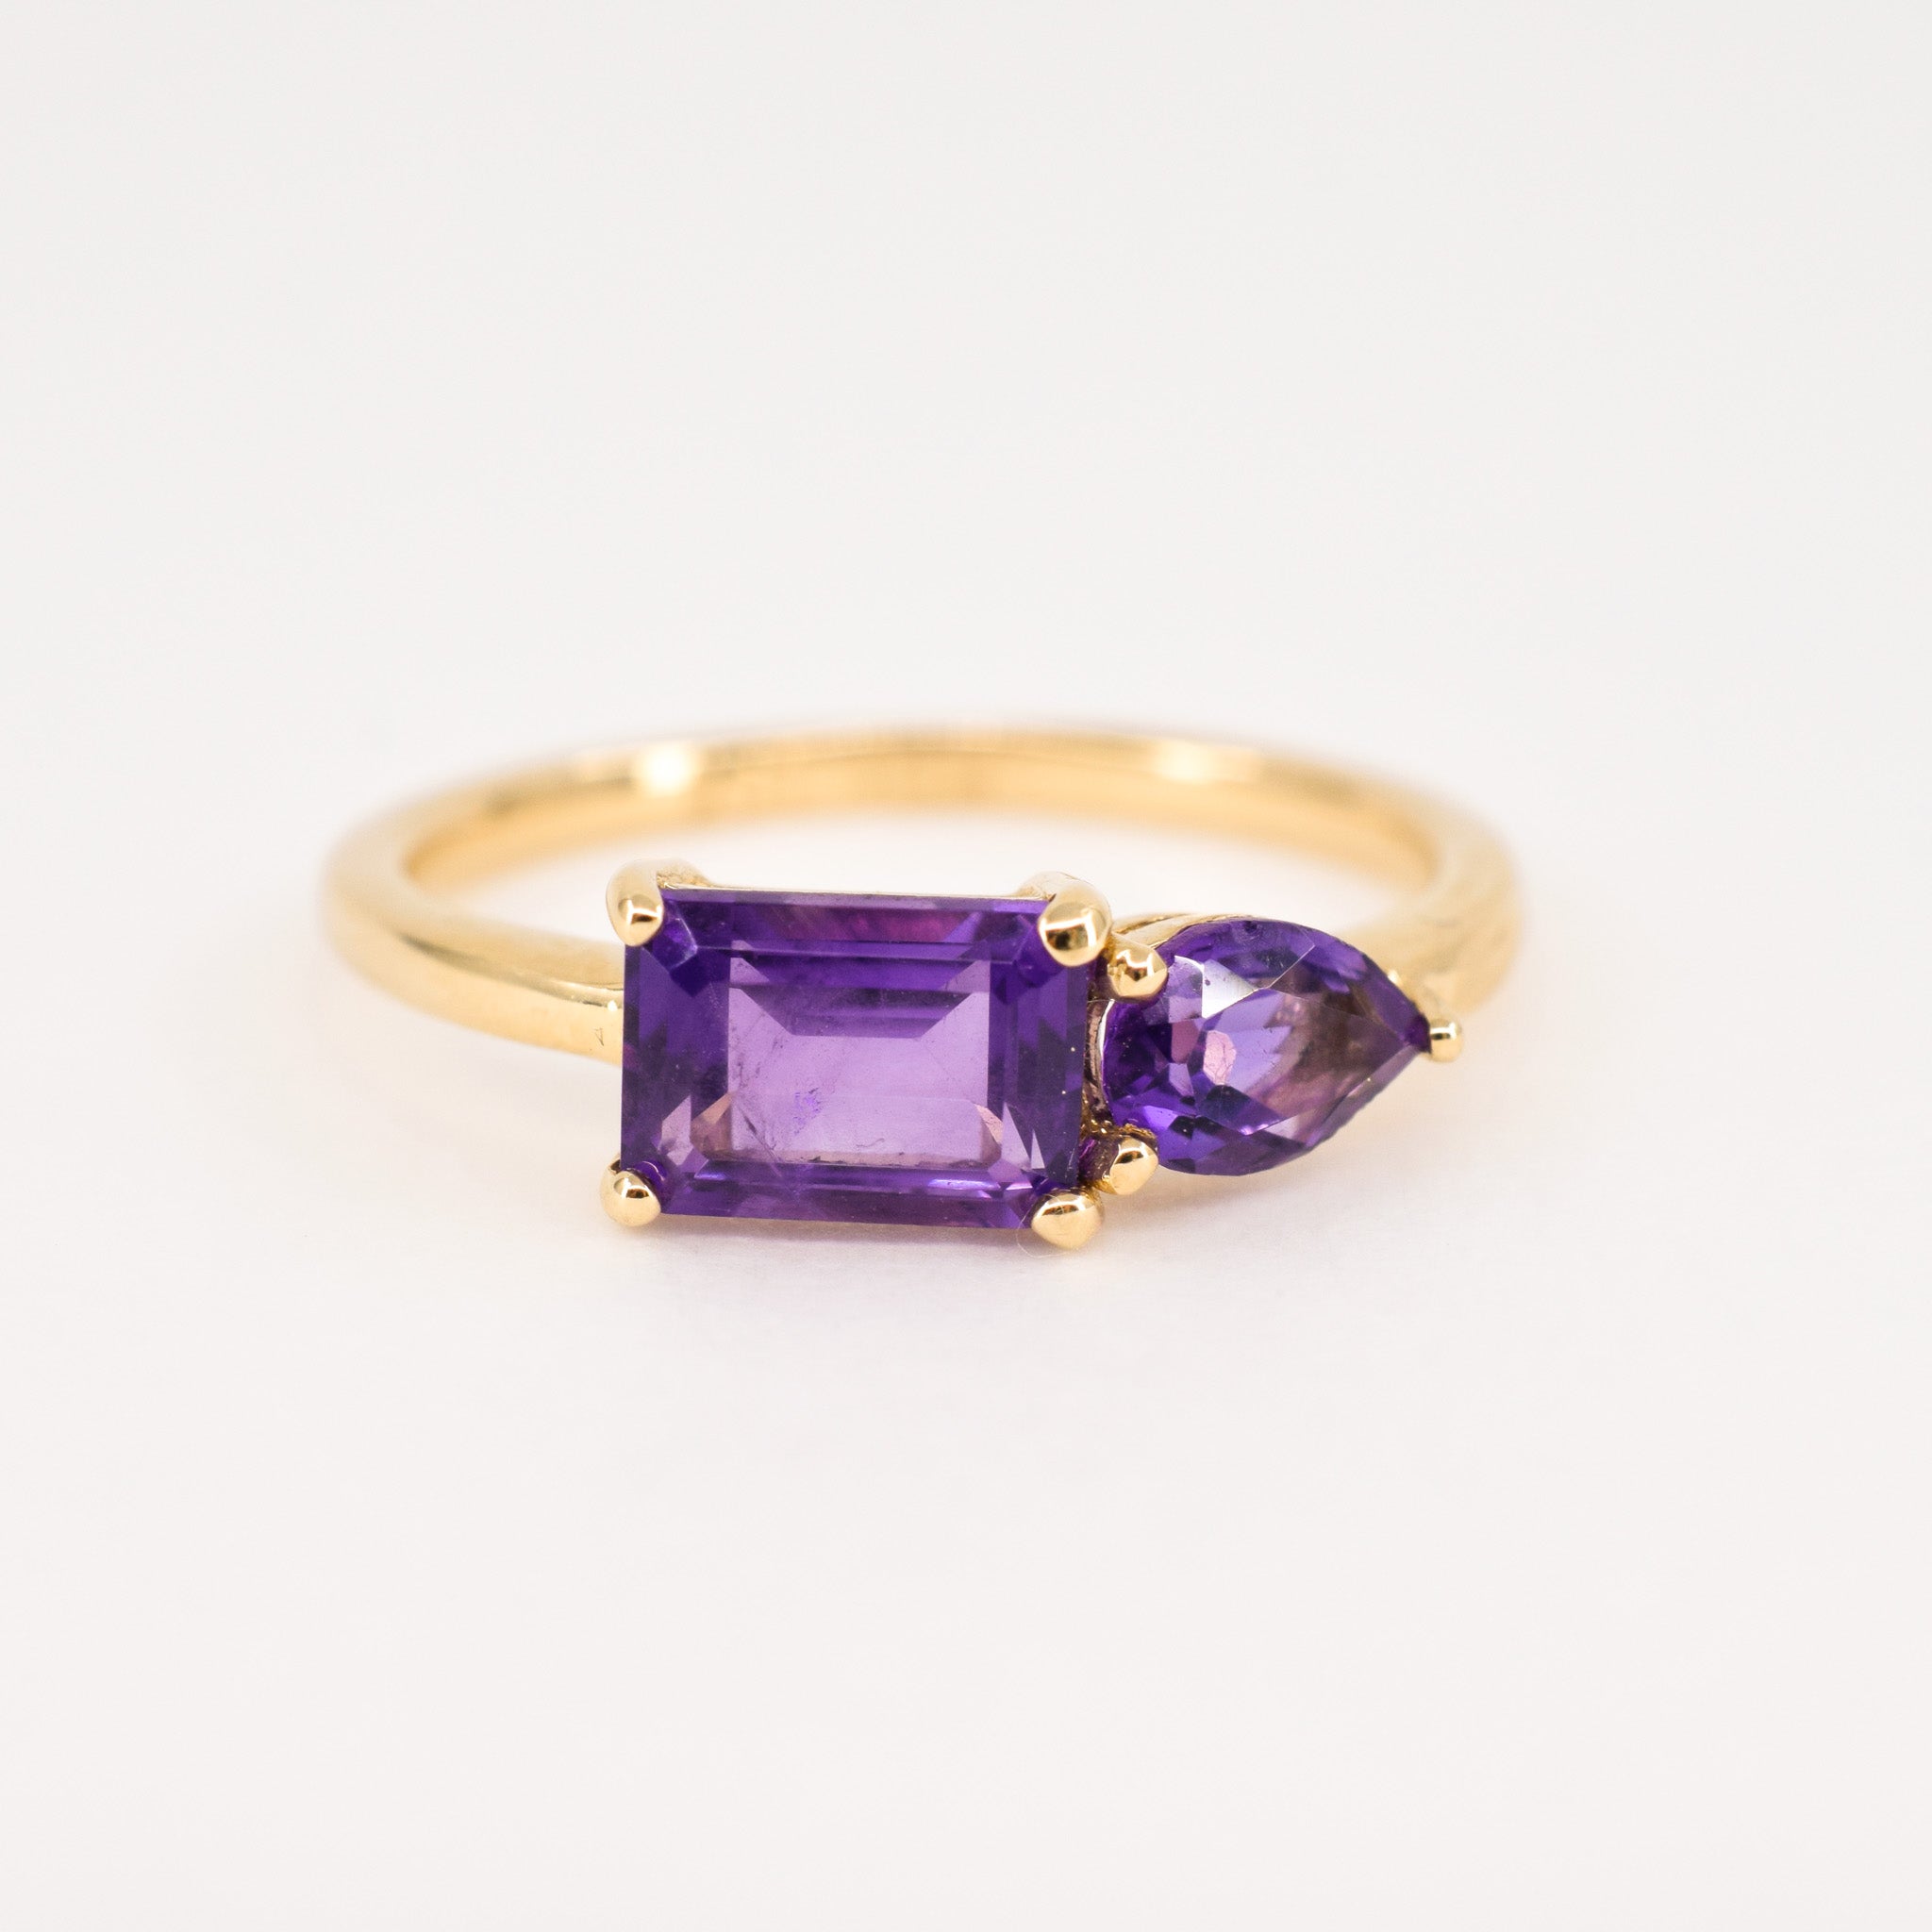 vintage gold amethyst moi et toi ring, amethyst ring, folklor vintage jewelry canada